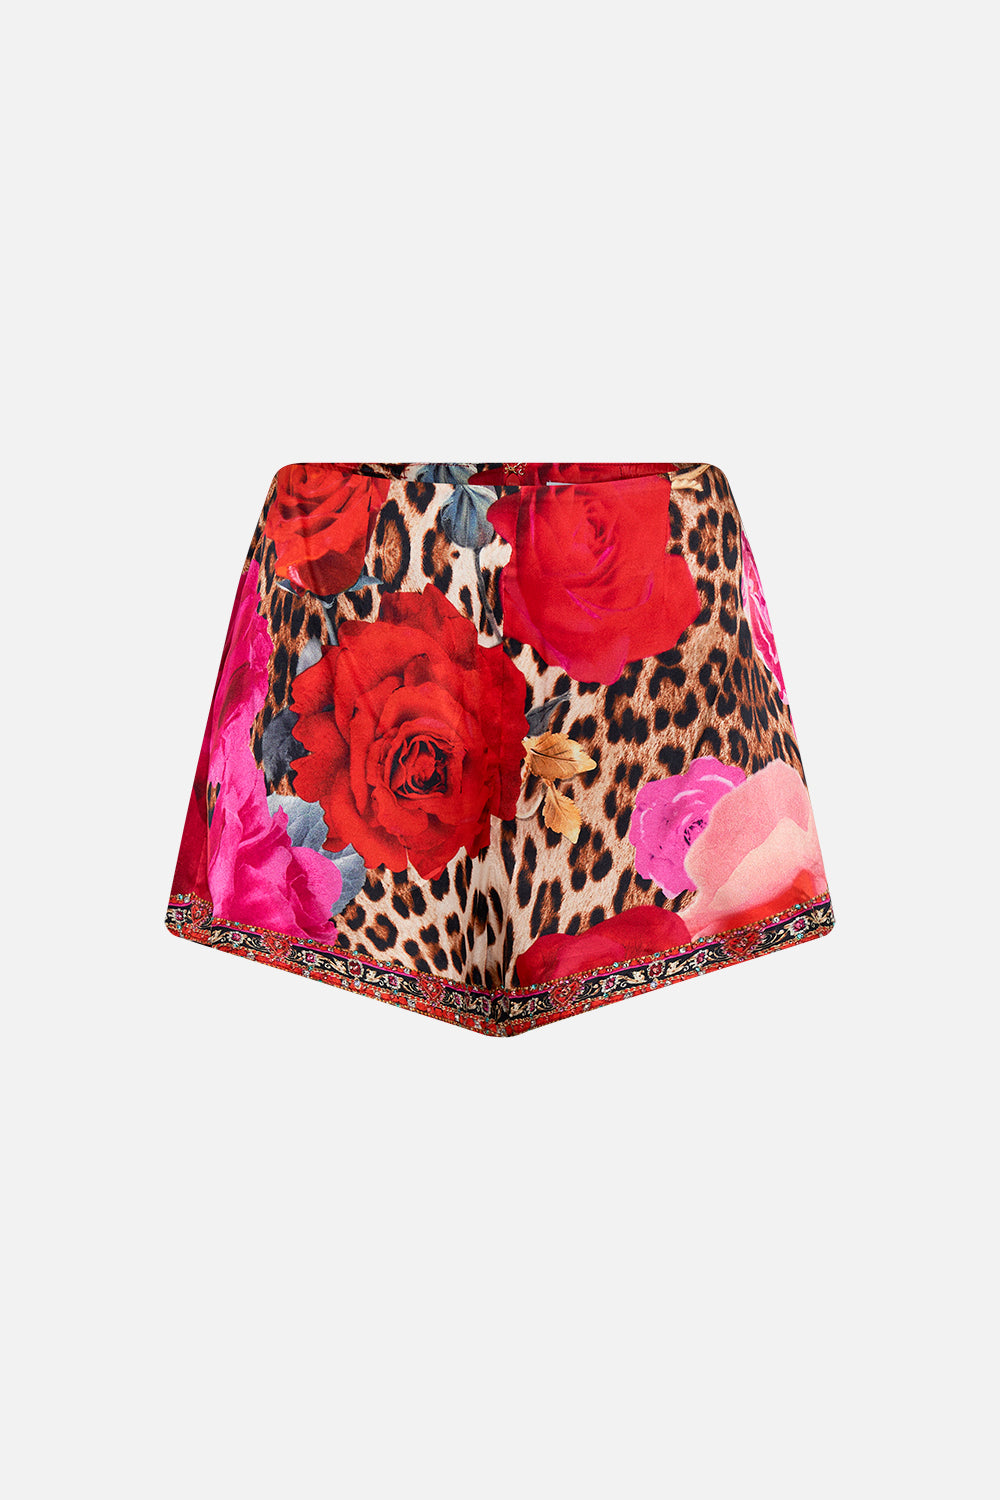 Product view of  CAMILLA silk shorts in Heart Like A Wildflower print